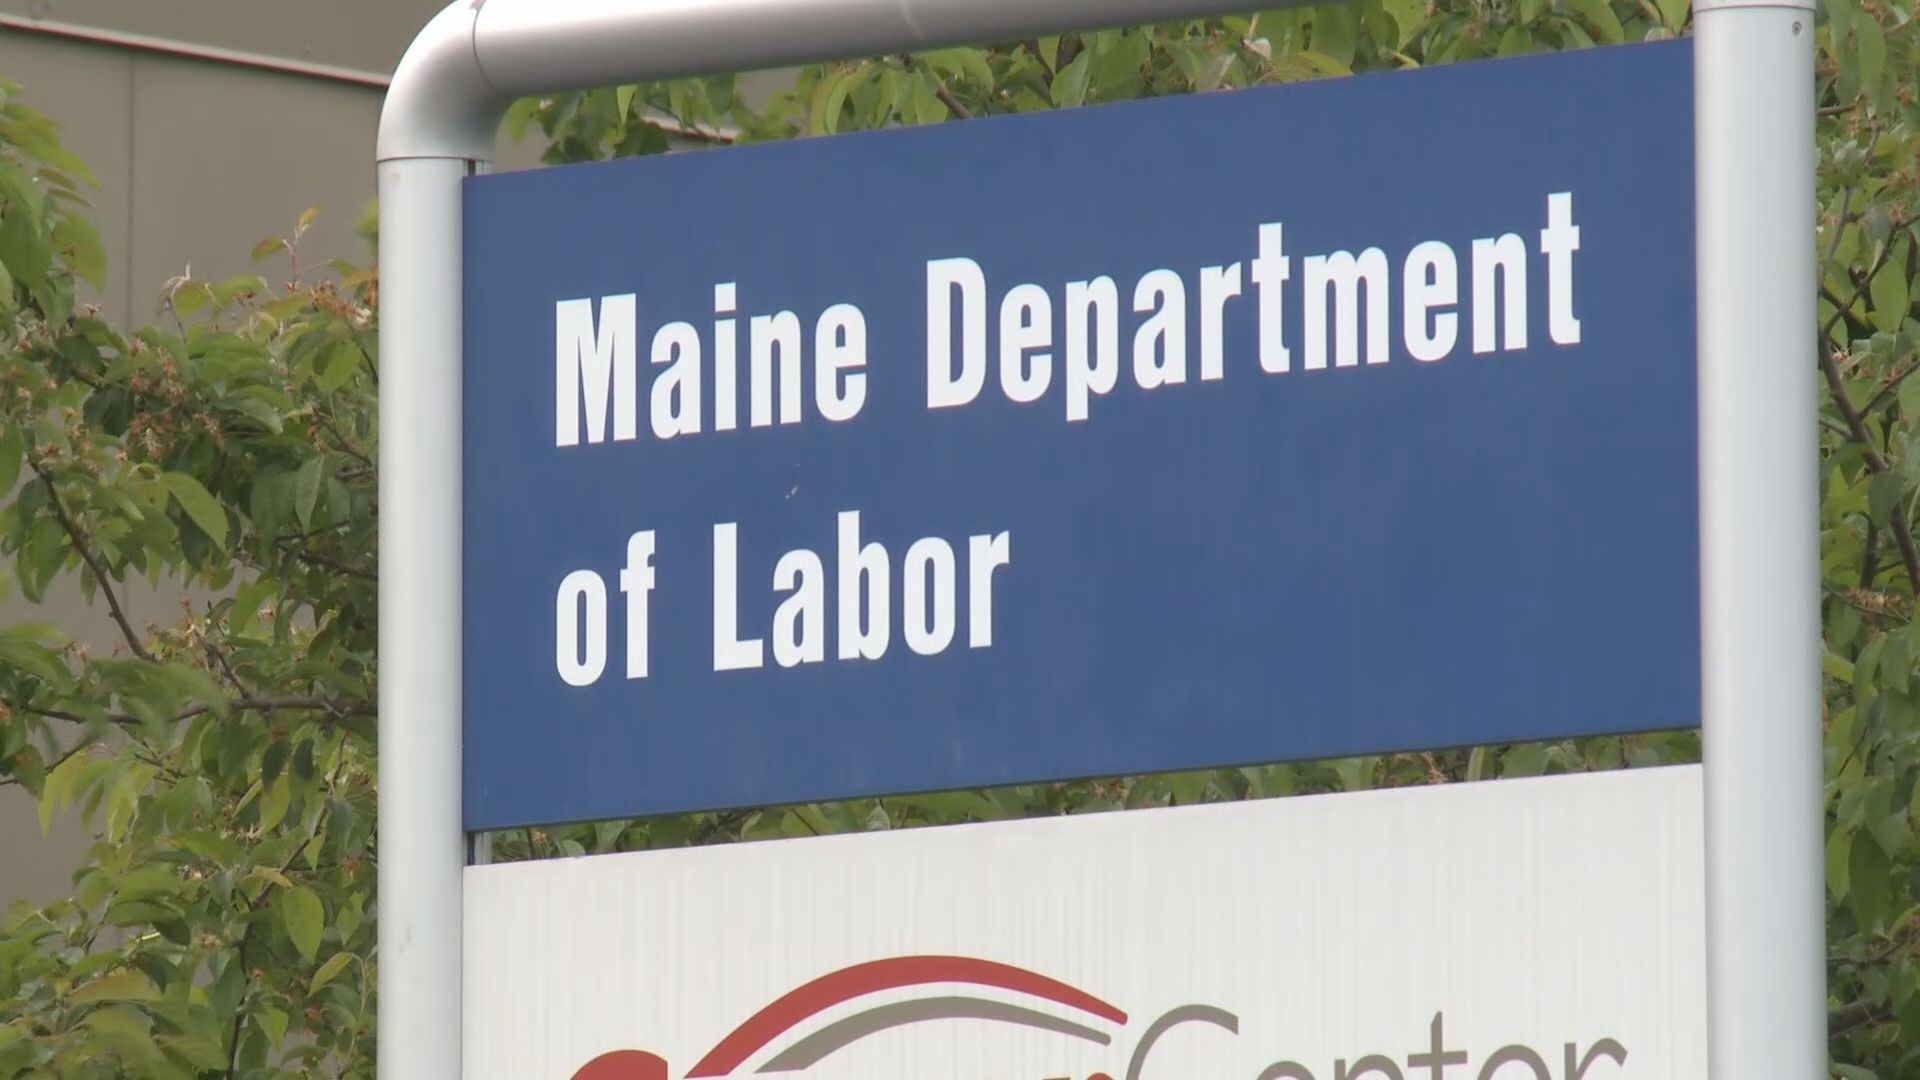 The Maine Department of Labor said it was notified about the layoff last week and issued a warn notice, meaning the layoffs would happen two months later.